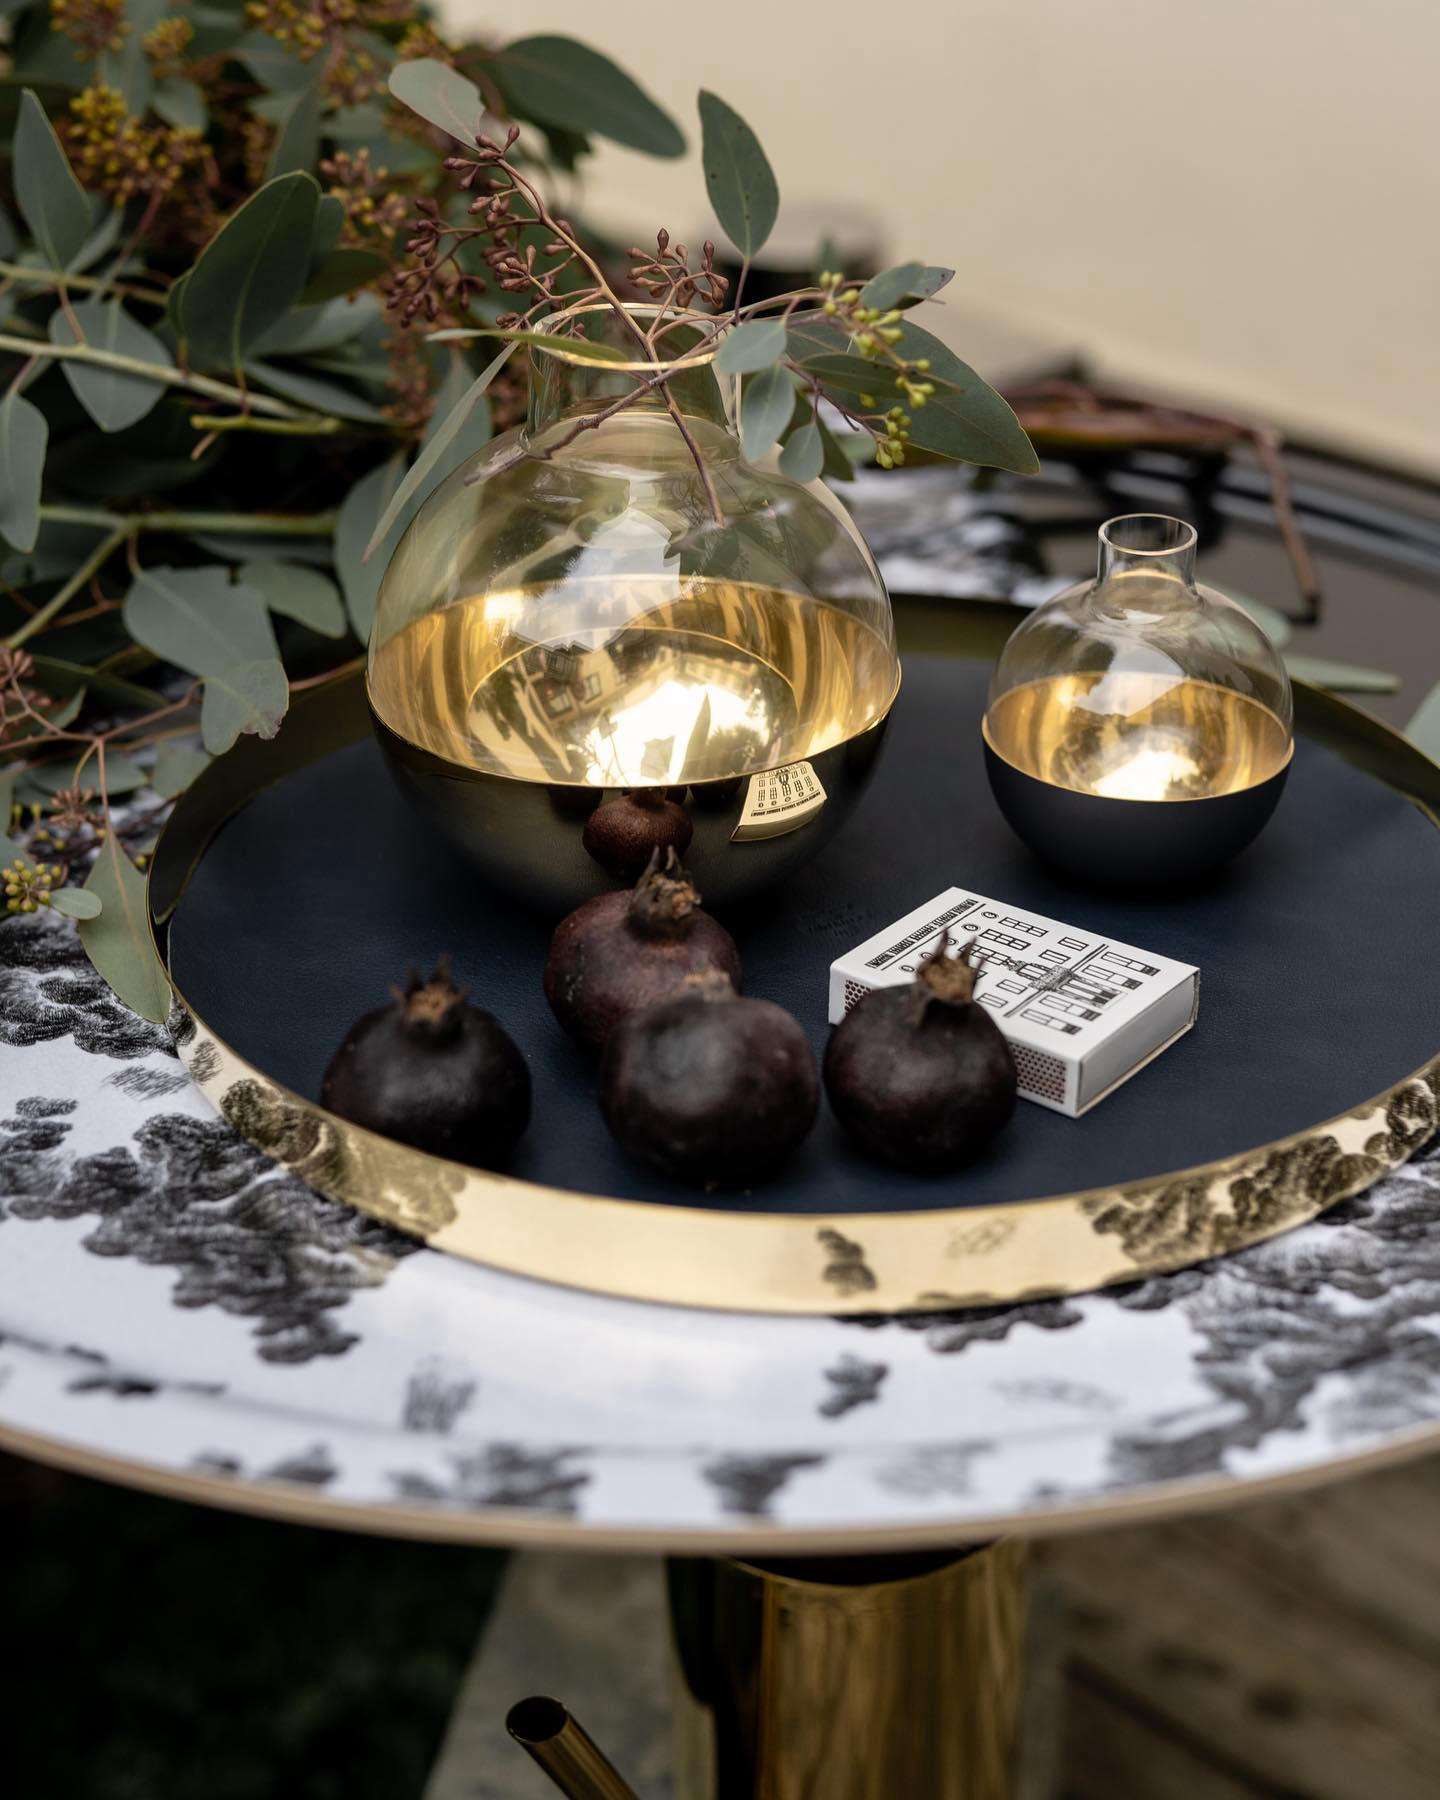 image  1 Skultuna - Karui tray and Pomme vases, a perfect match for Christmas